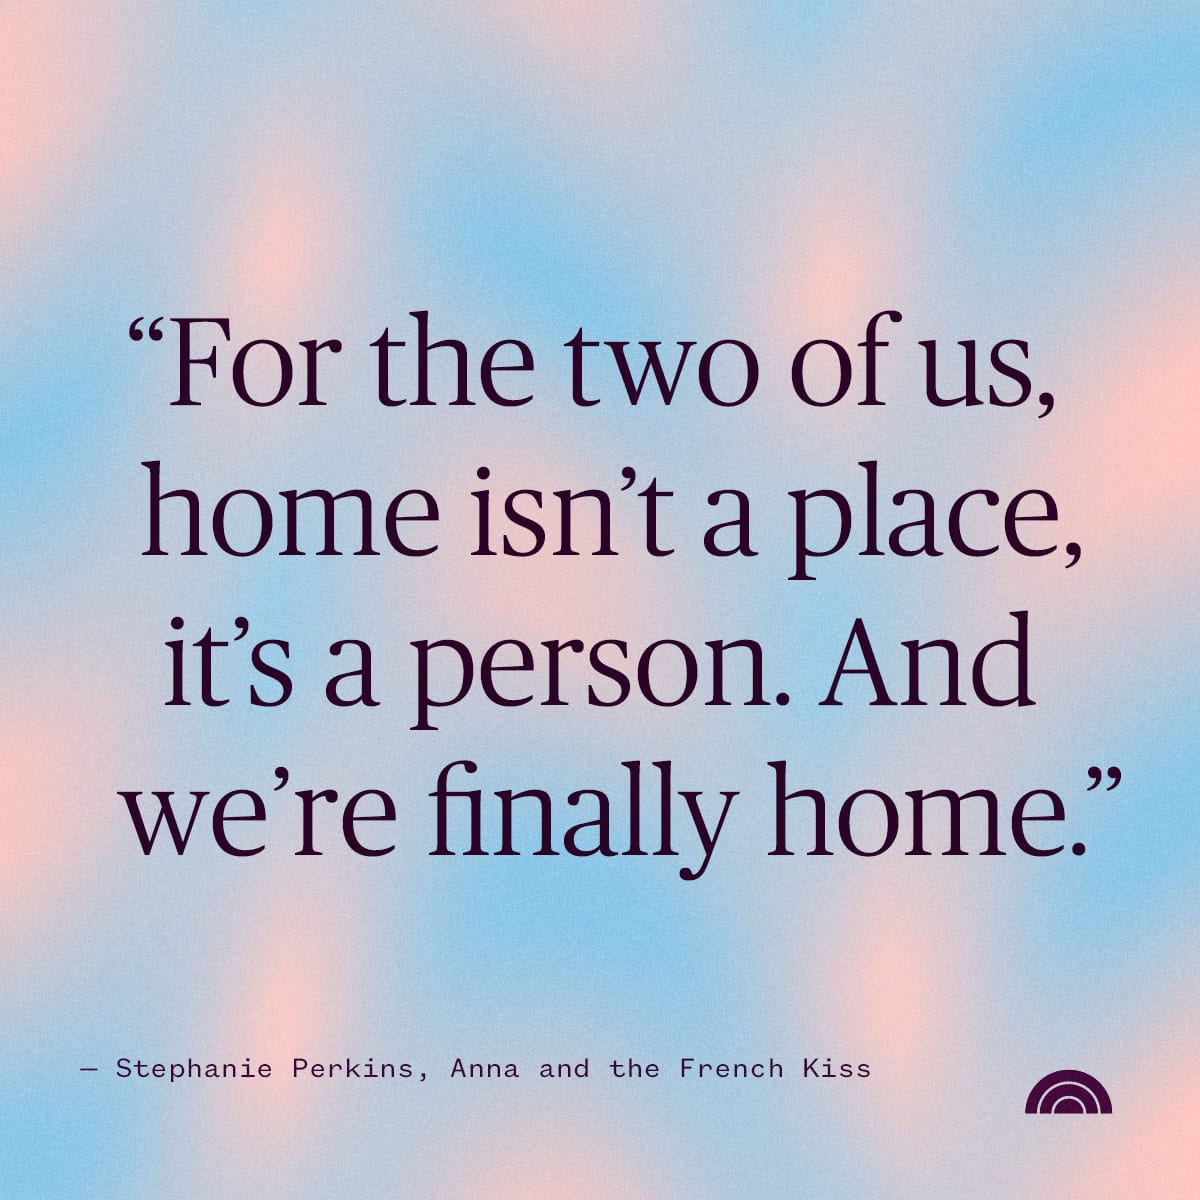 Stephanie Perkins quote: For the two of us, home isn't a place. It